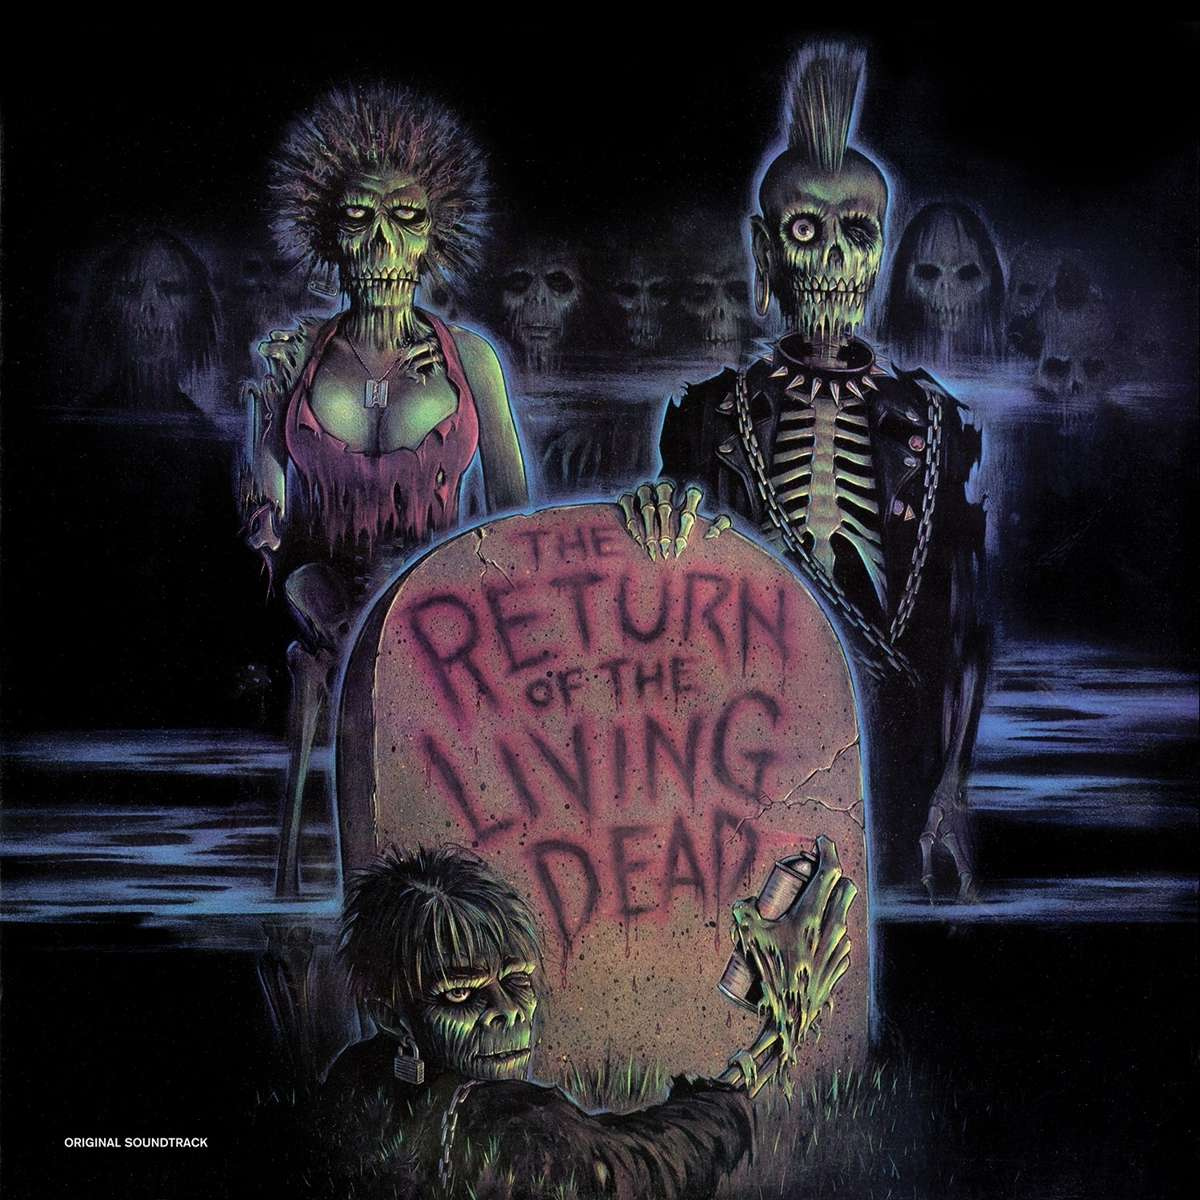 THE RETURN OF THE LIVING DEAD--ORIGINAL SOUNDTRACK (LIMITED CLEAR WITH BLOOD RE